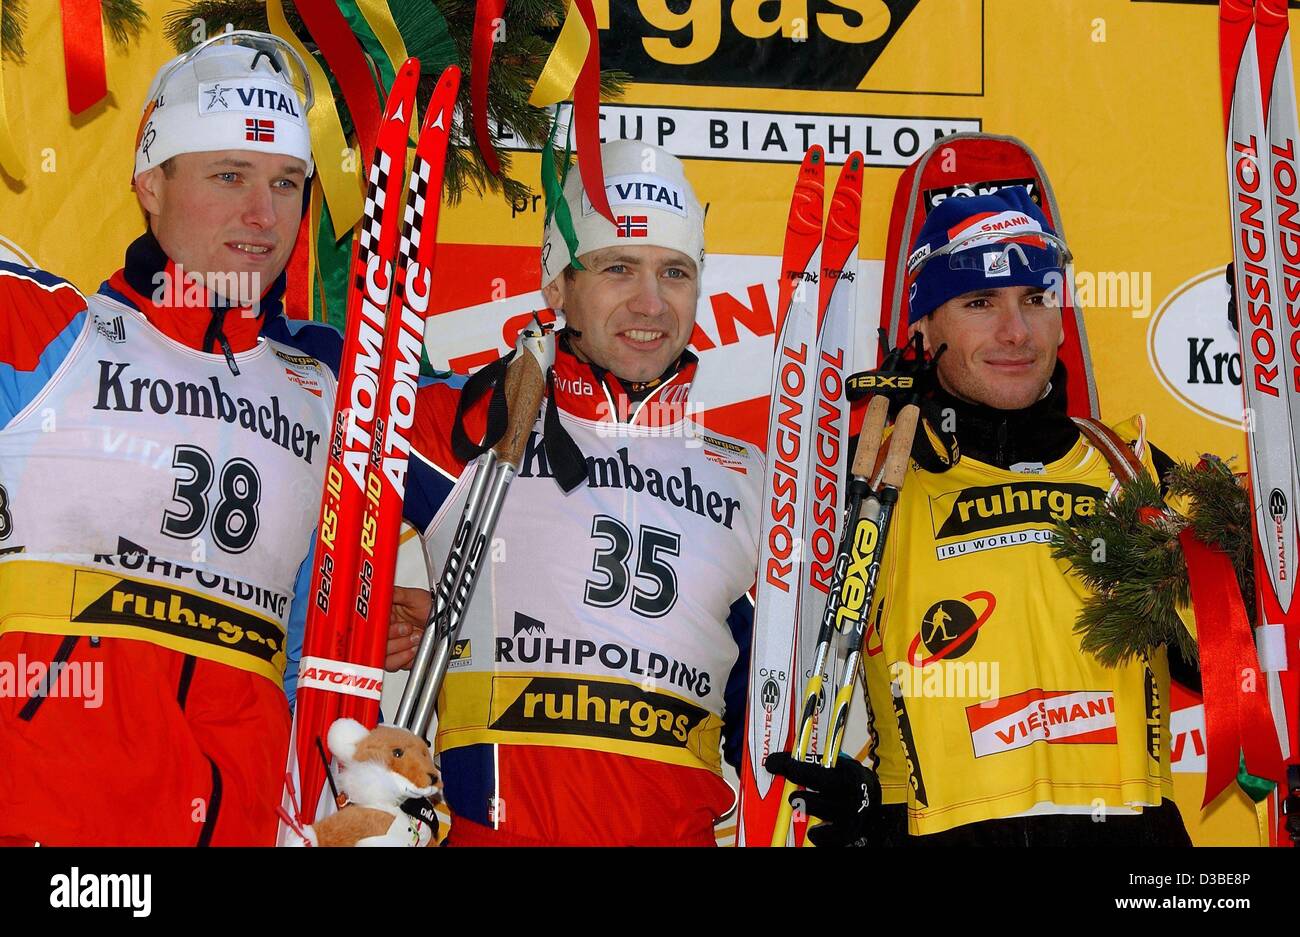 (dpa) - The Norwegian biathlete Ole Einar Bjoerndalen (C) smiles happily with fellow countryman Frode Andresen (L) and Frenchman Raphael Poiree (R) at the Biathlon World Cup awards ceremony for sprinting in Ruhpolding, southern Germany, 18 January 2003.  Olympic champion Bjoerndalen won the 10km spr Stock Photo